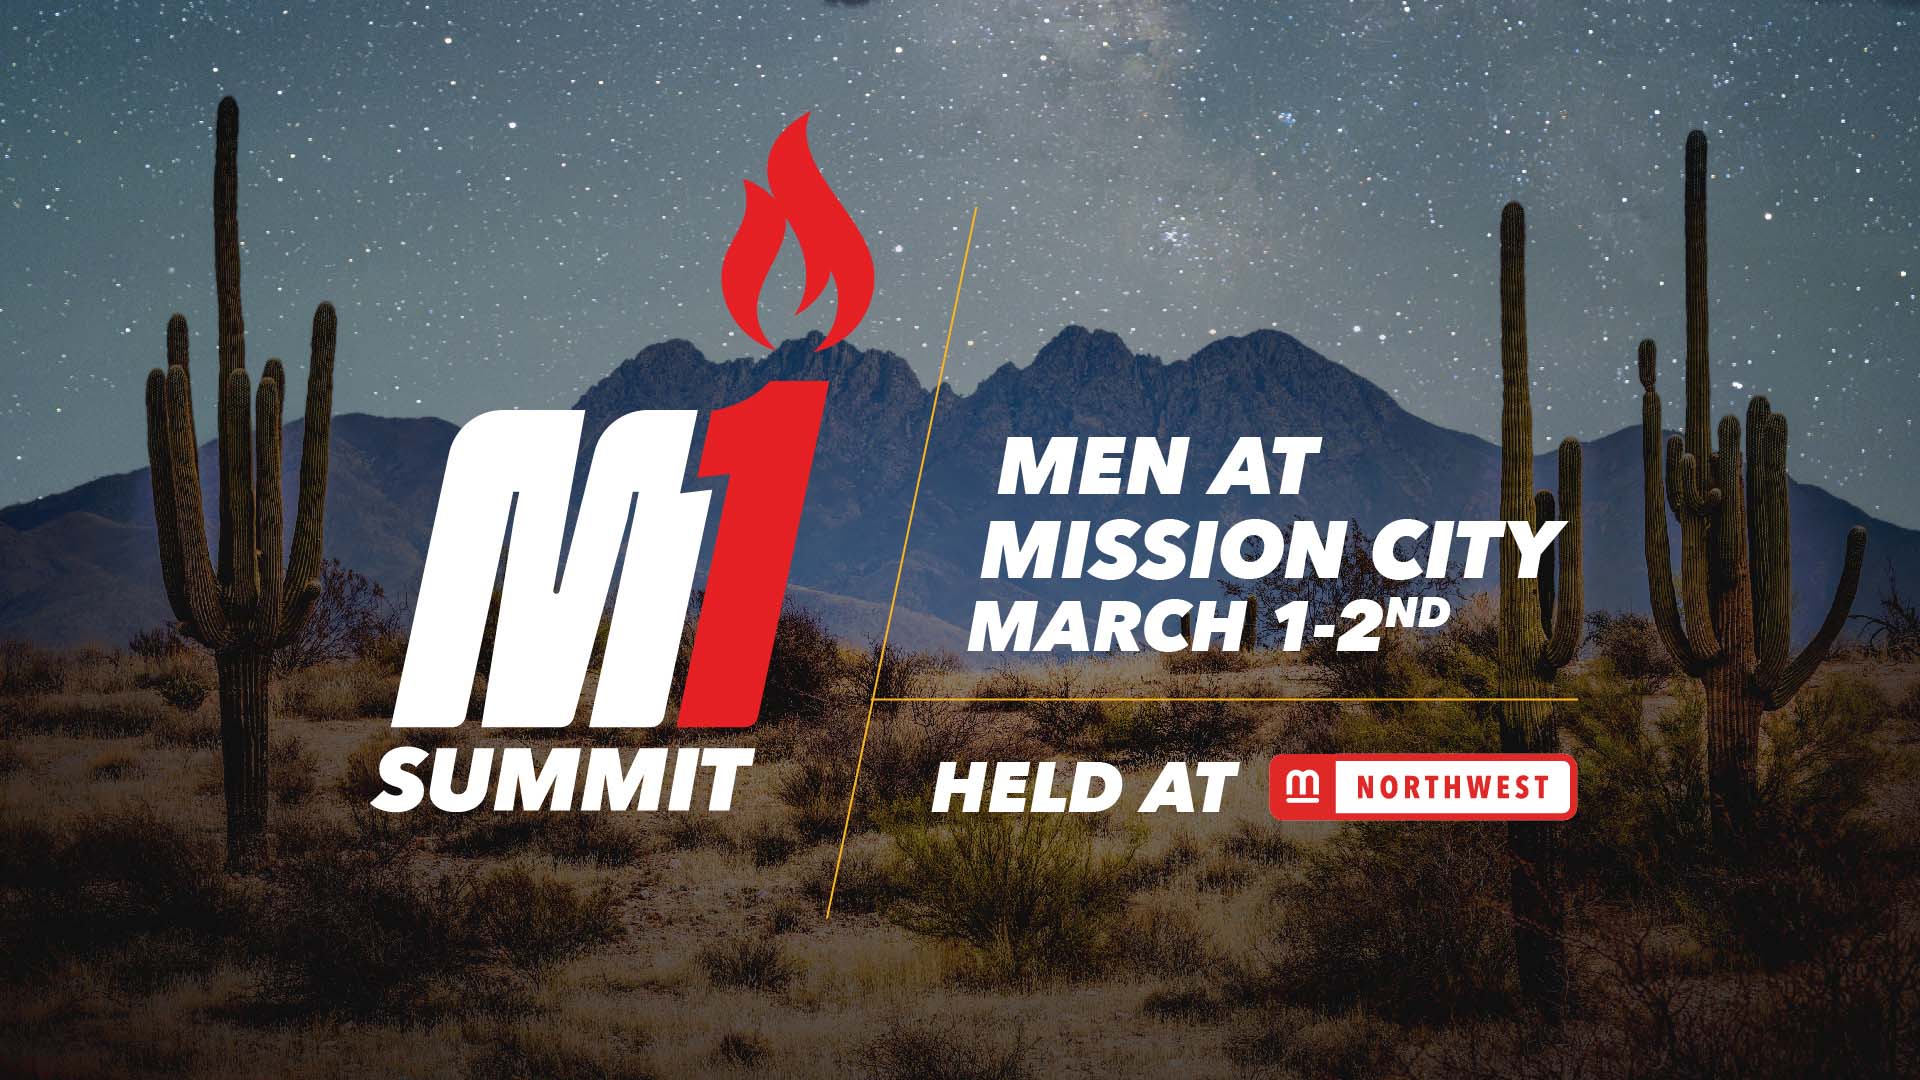 Men's Conference, Man Summit, M1 Groups, Mission City Men's ministry